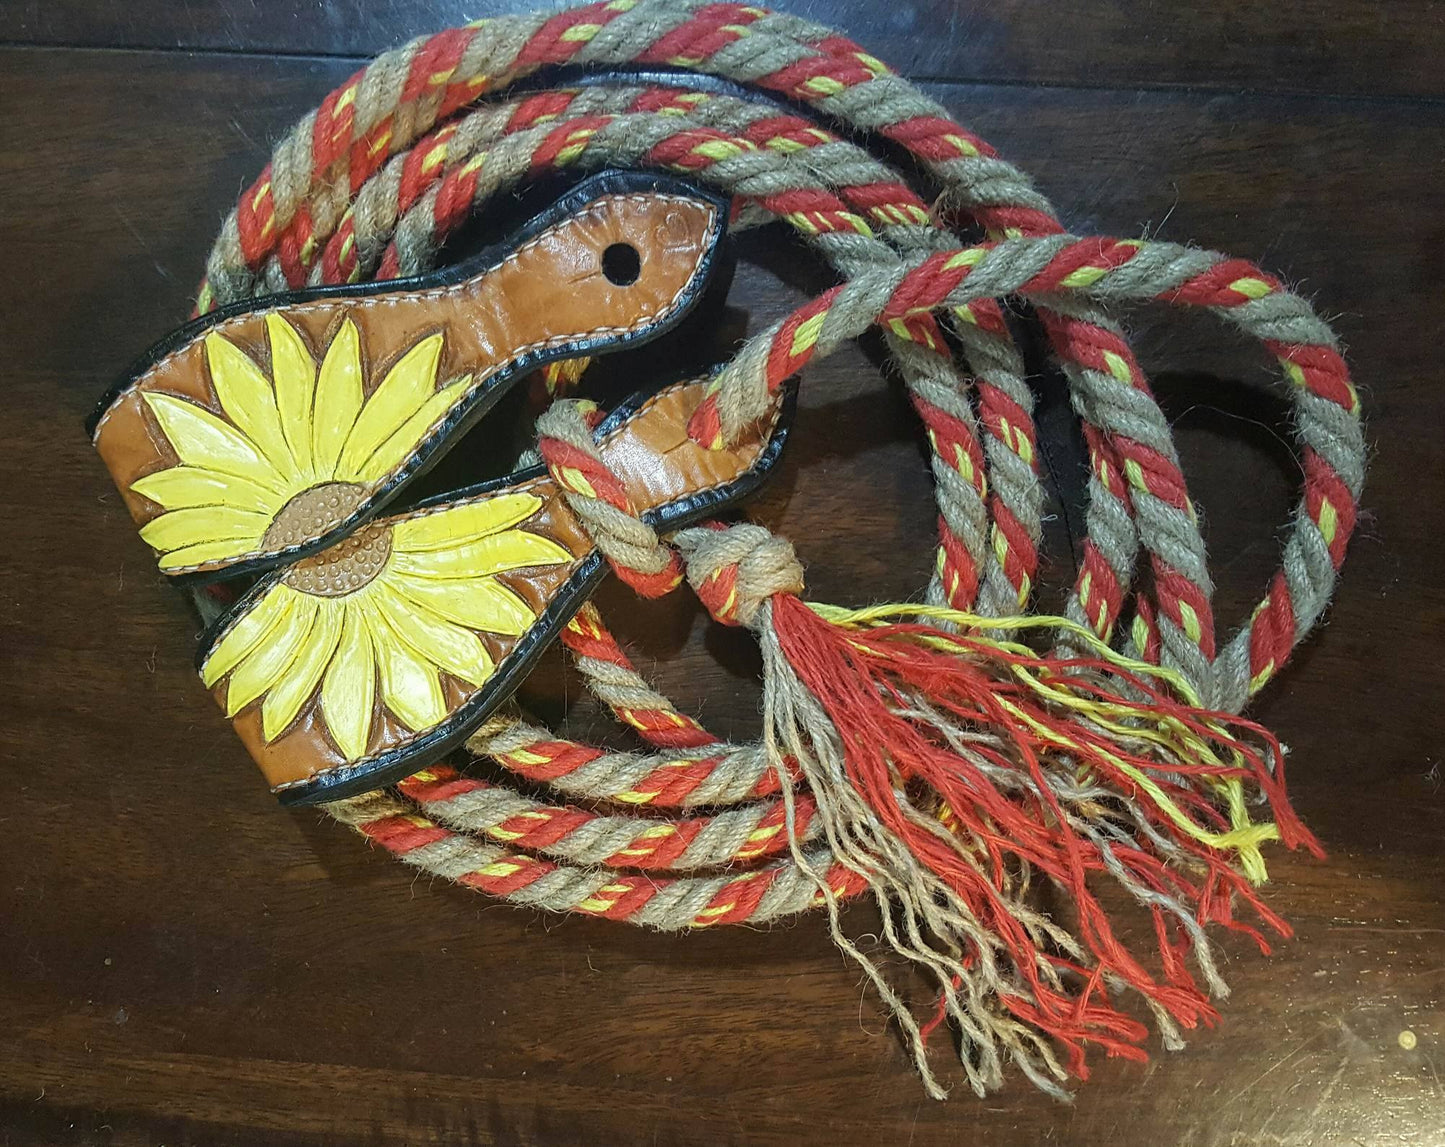 Set of cotton loop reins, and slobber straps